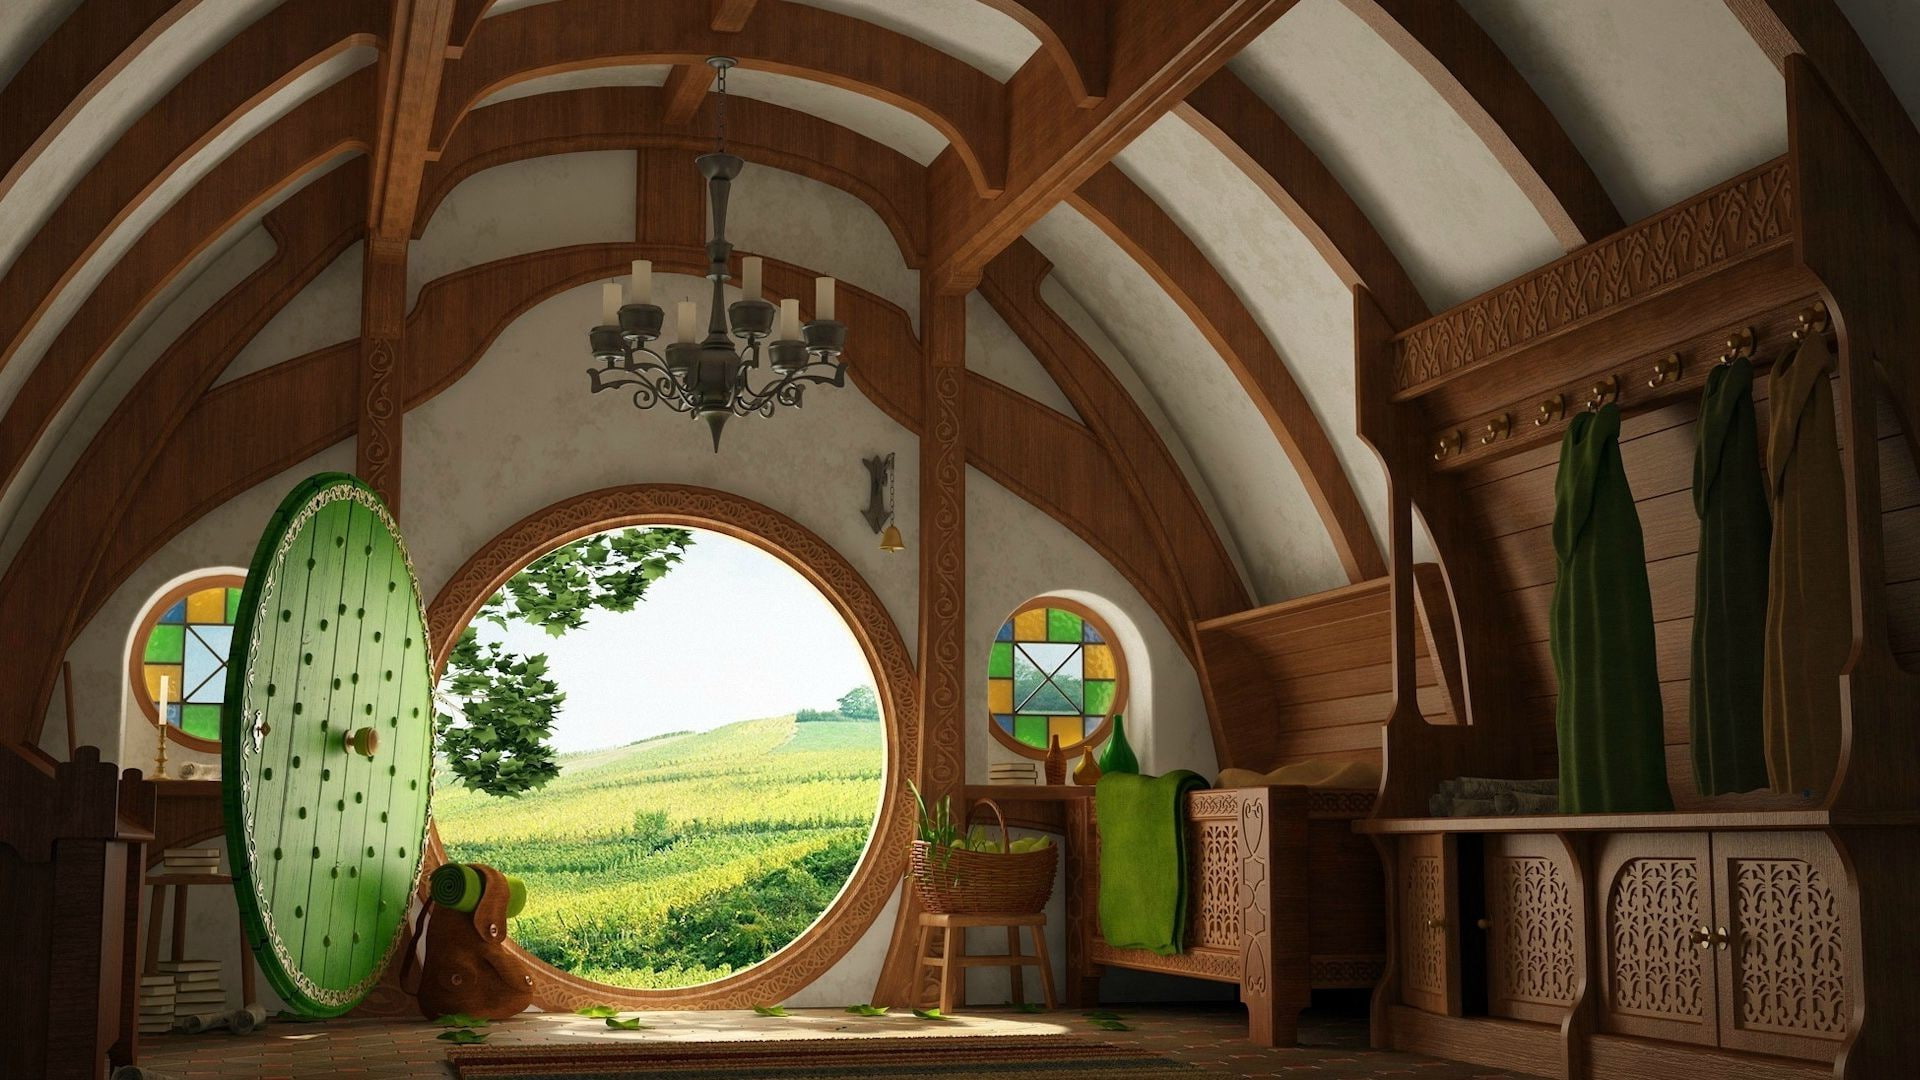 Bag End, The Lord Of The Rings, architecture, built structure